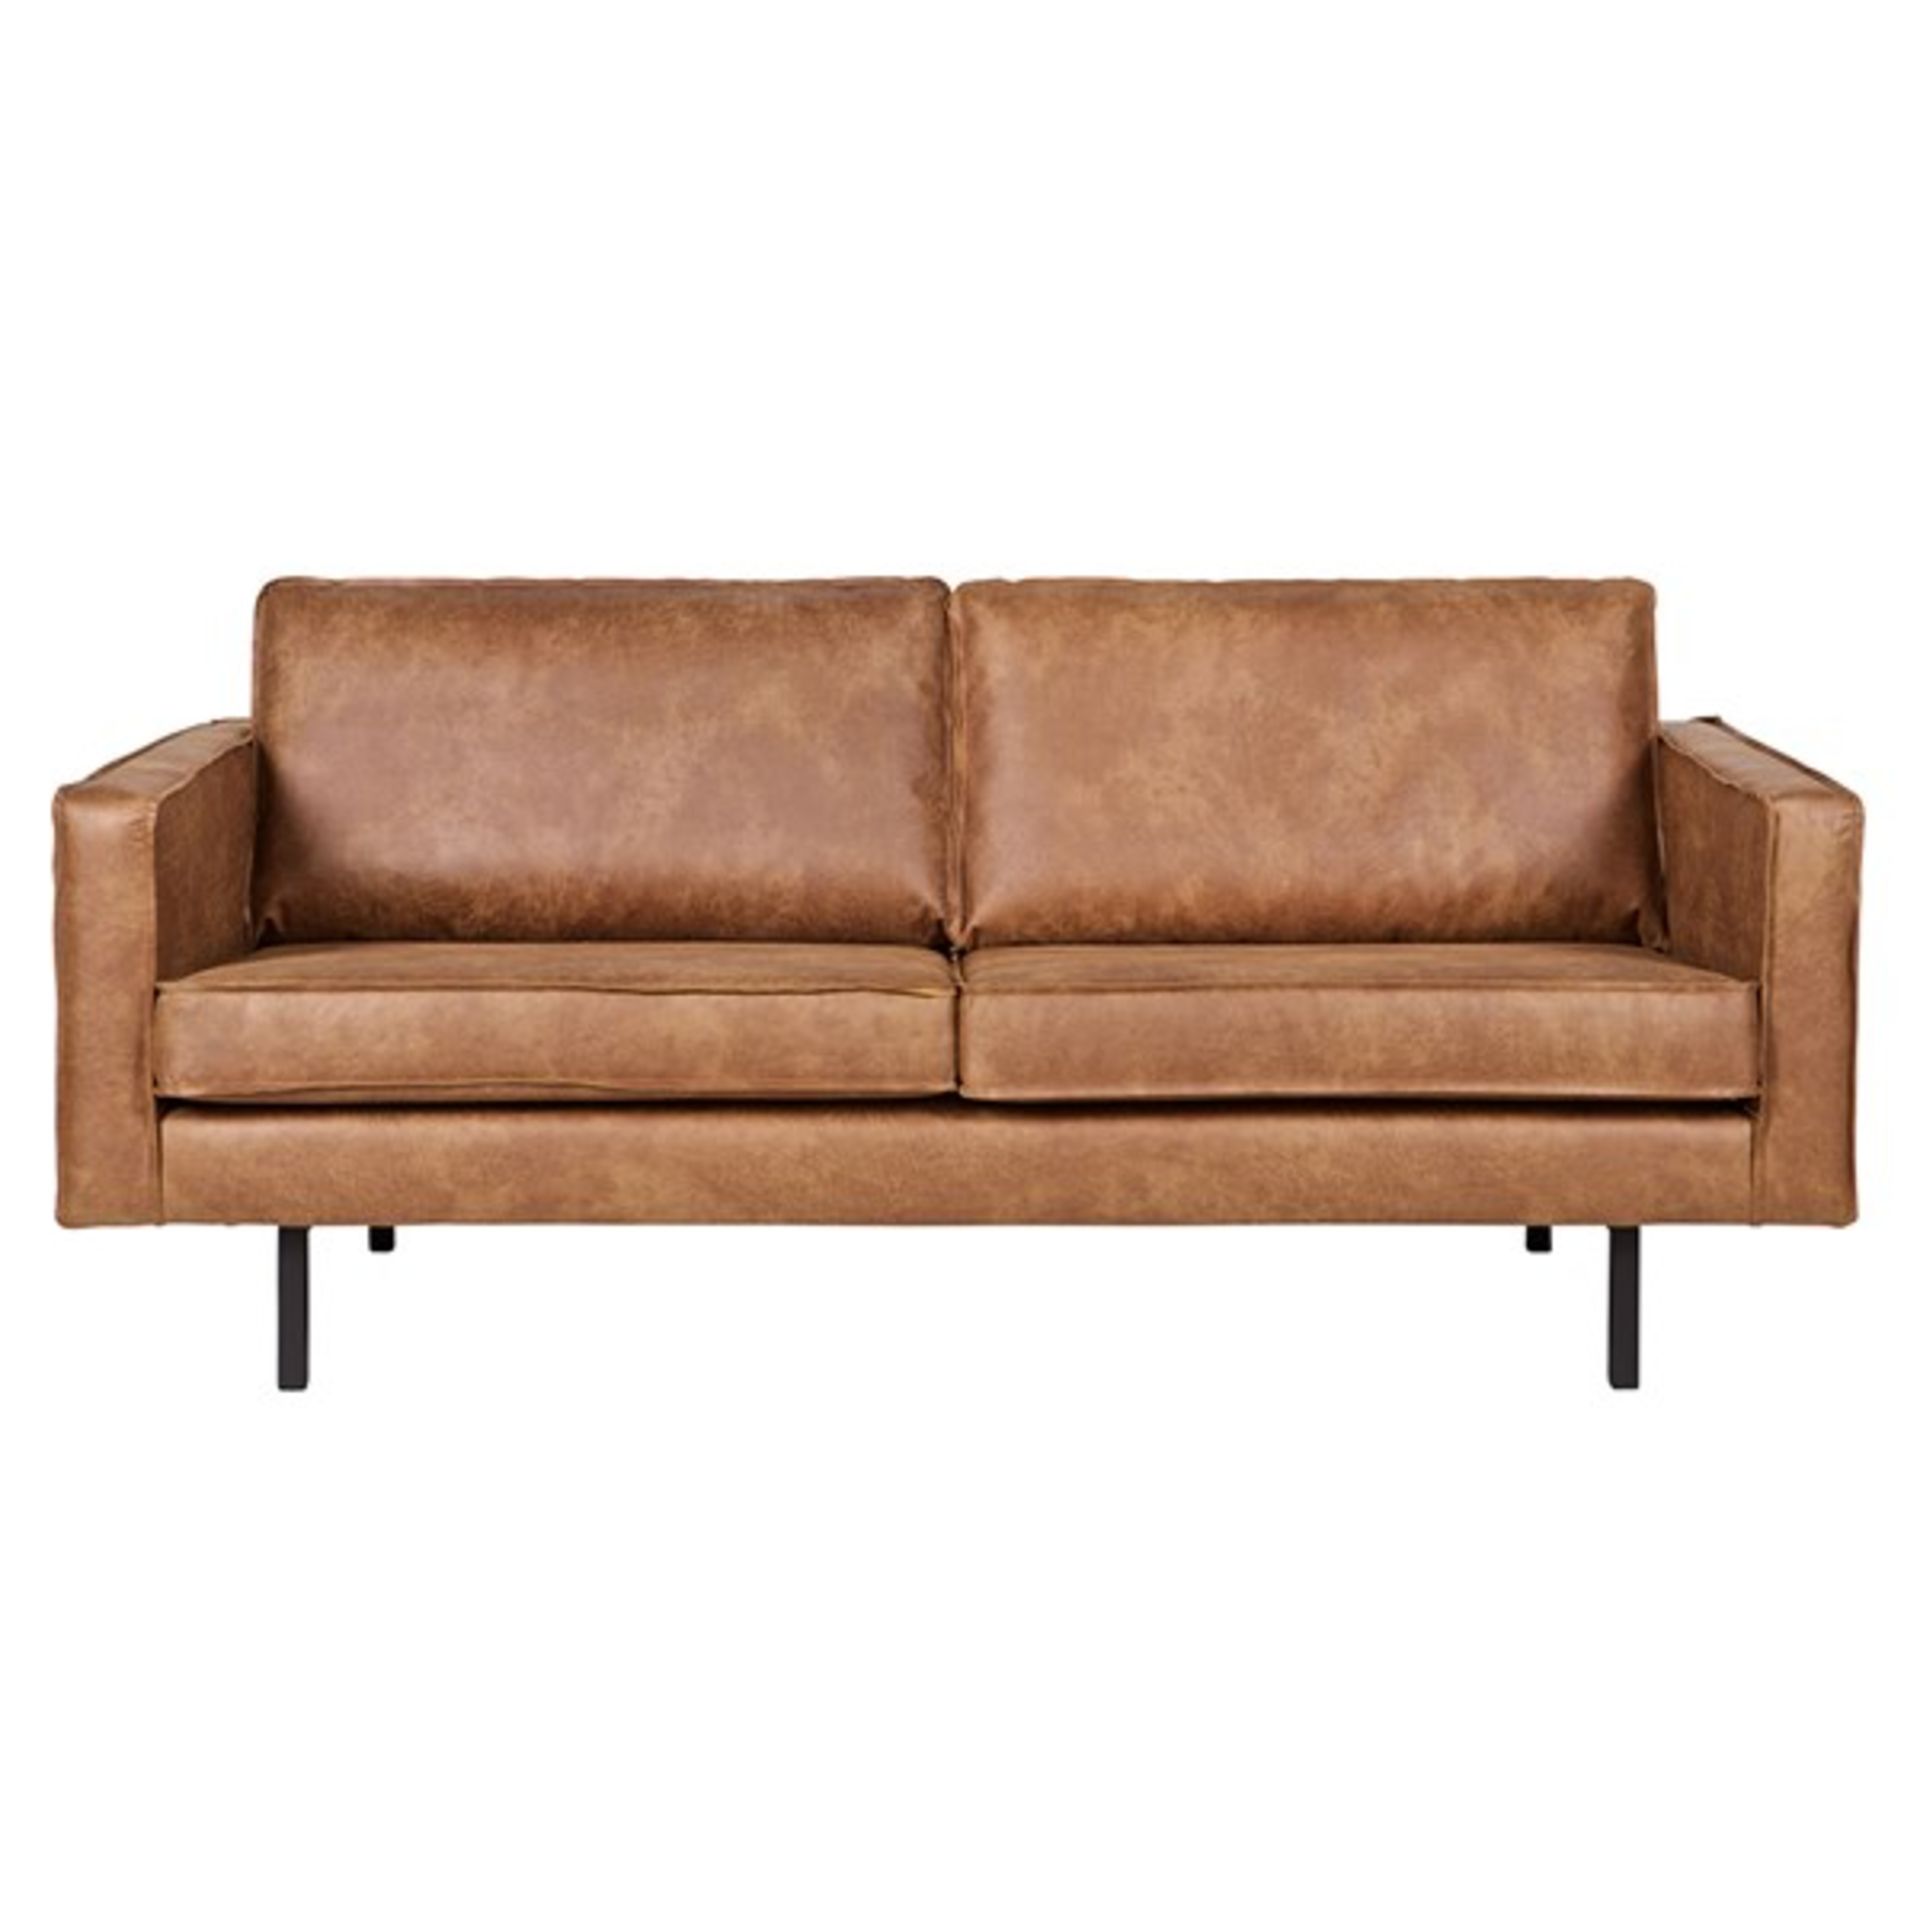 1 x Rodeo Two Seater Tan Leather Sofa With Kilburn & Scott Feather Cushions - Image 3 of 13